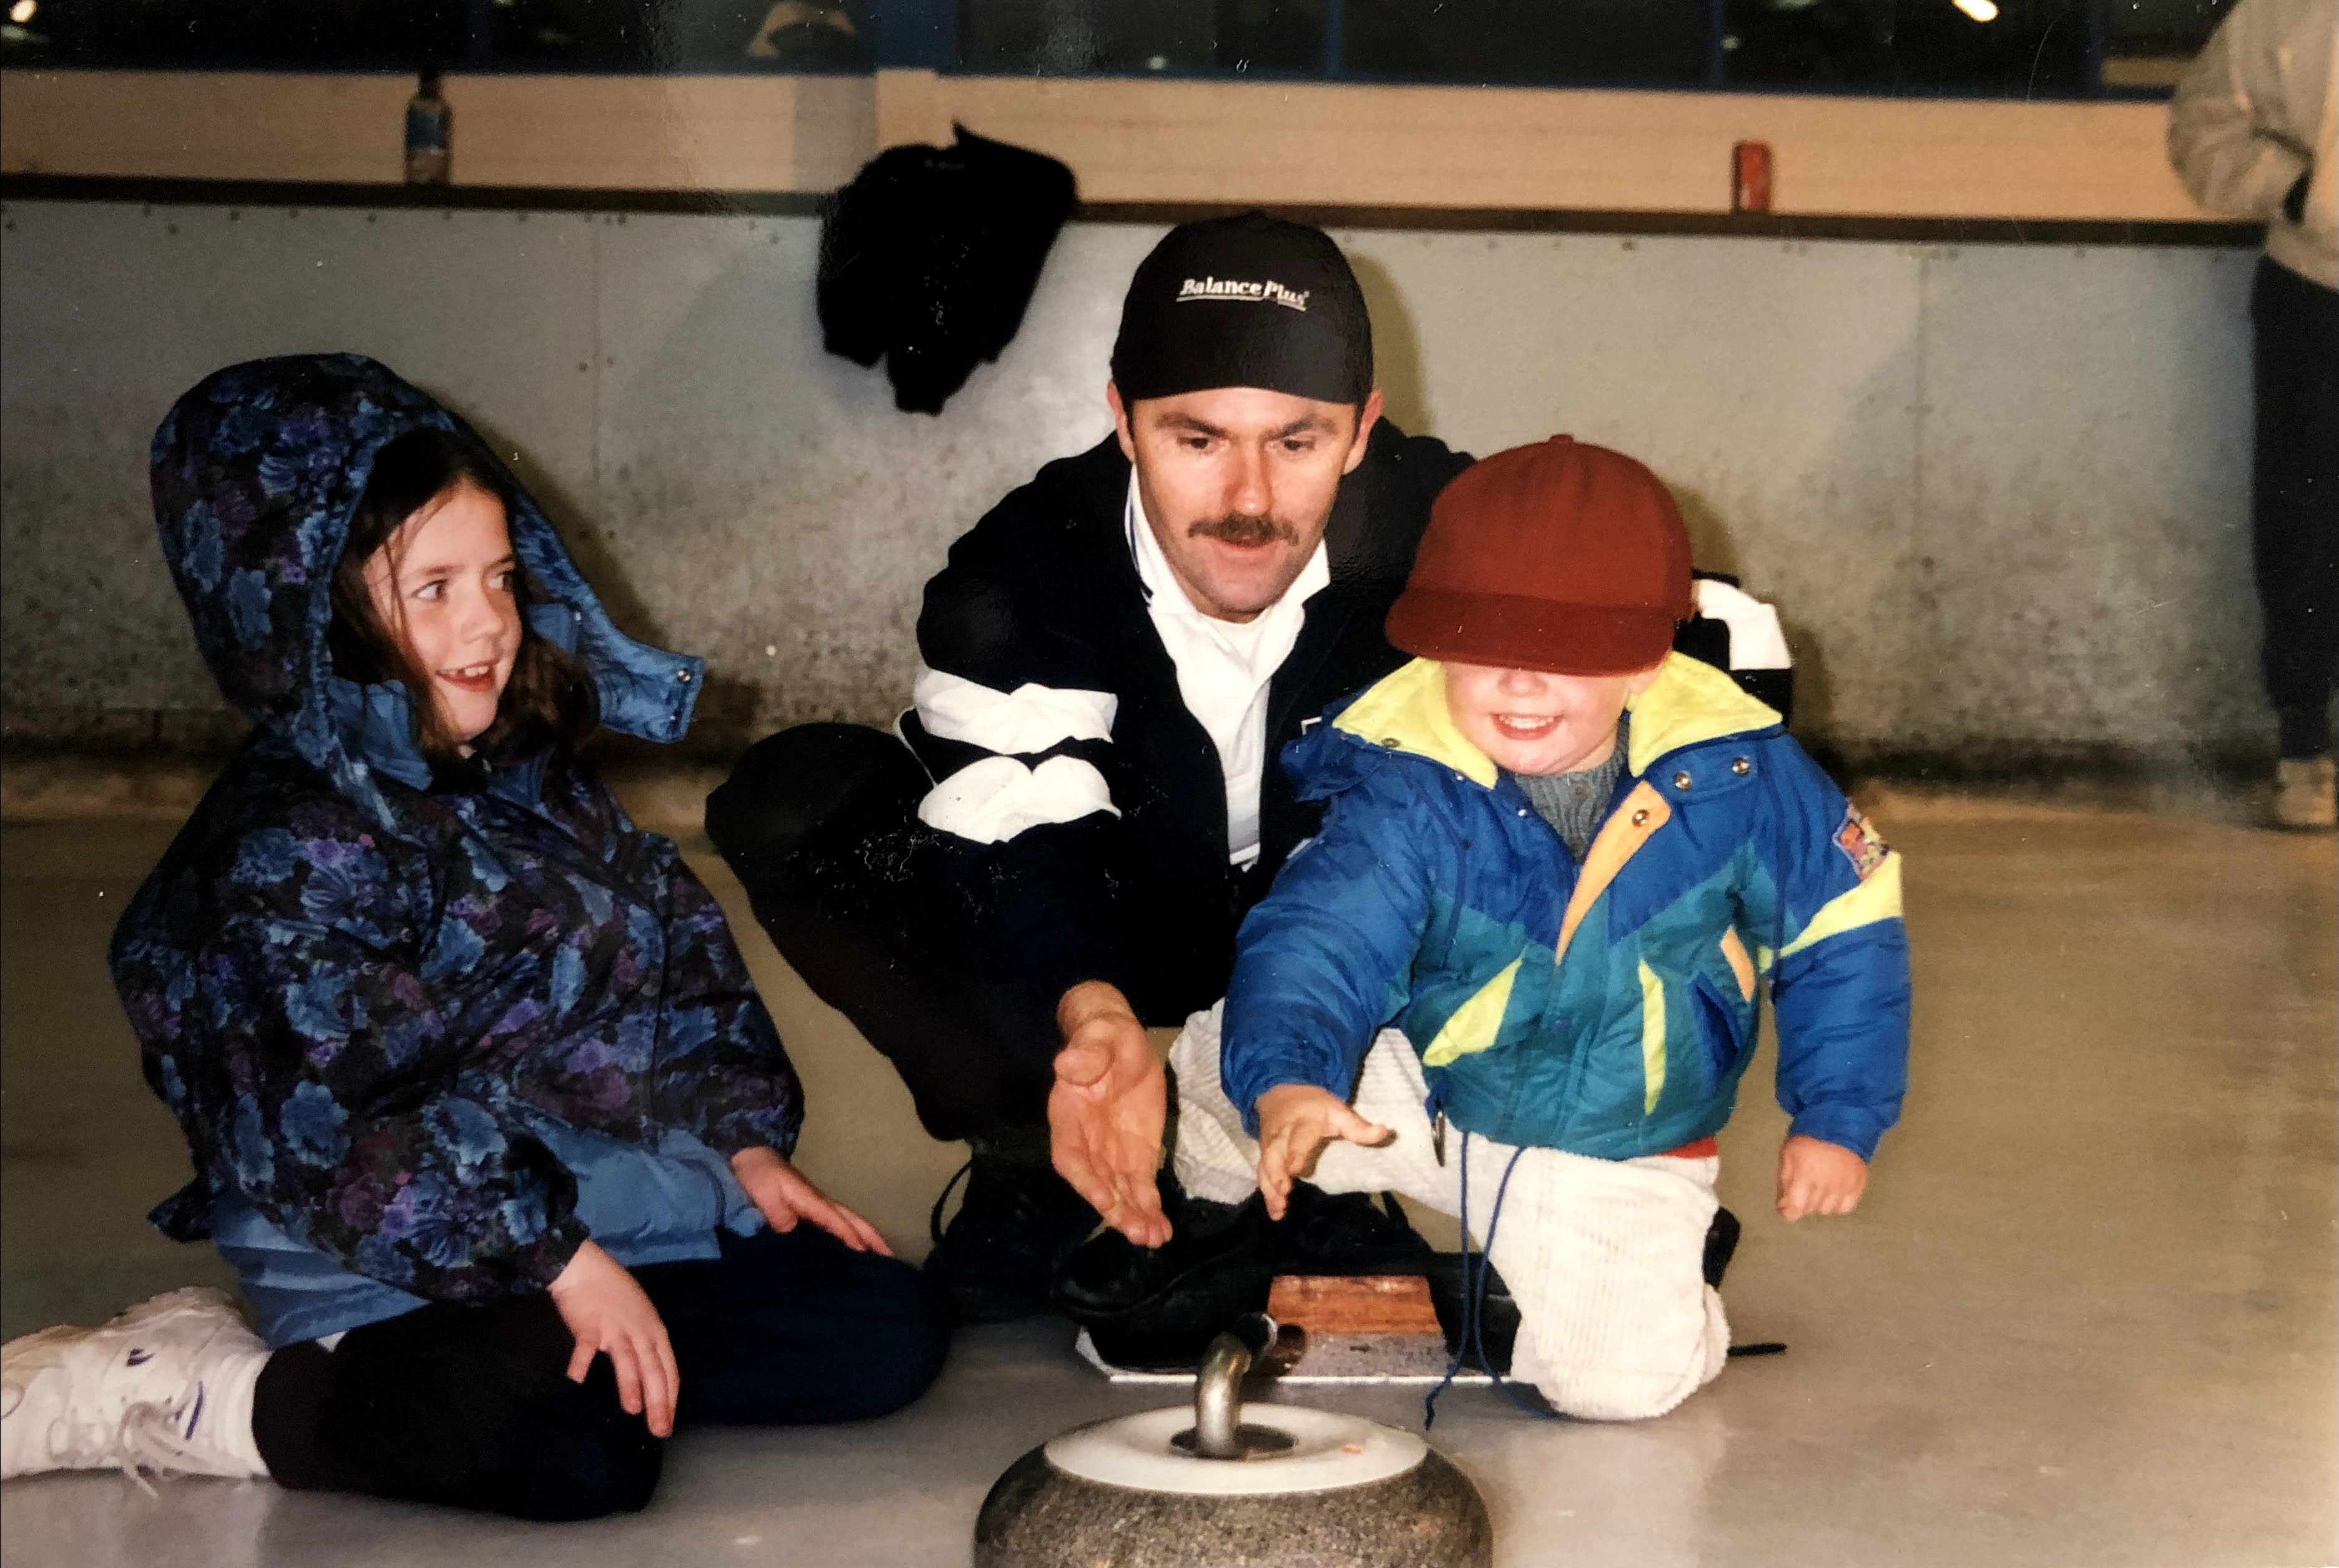 Dean, aged 5 (left) curling with his dad (center).